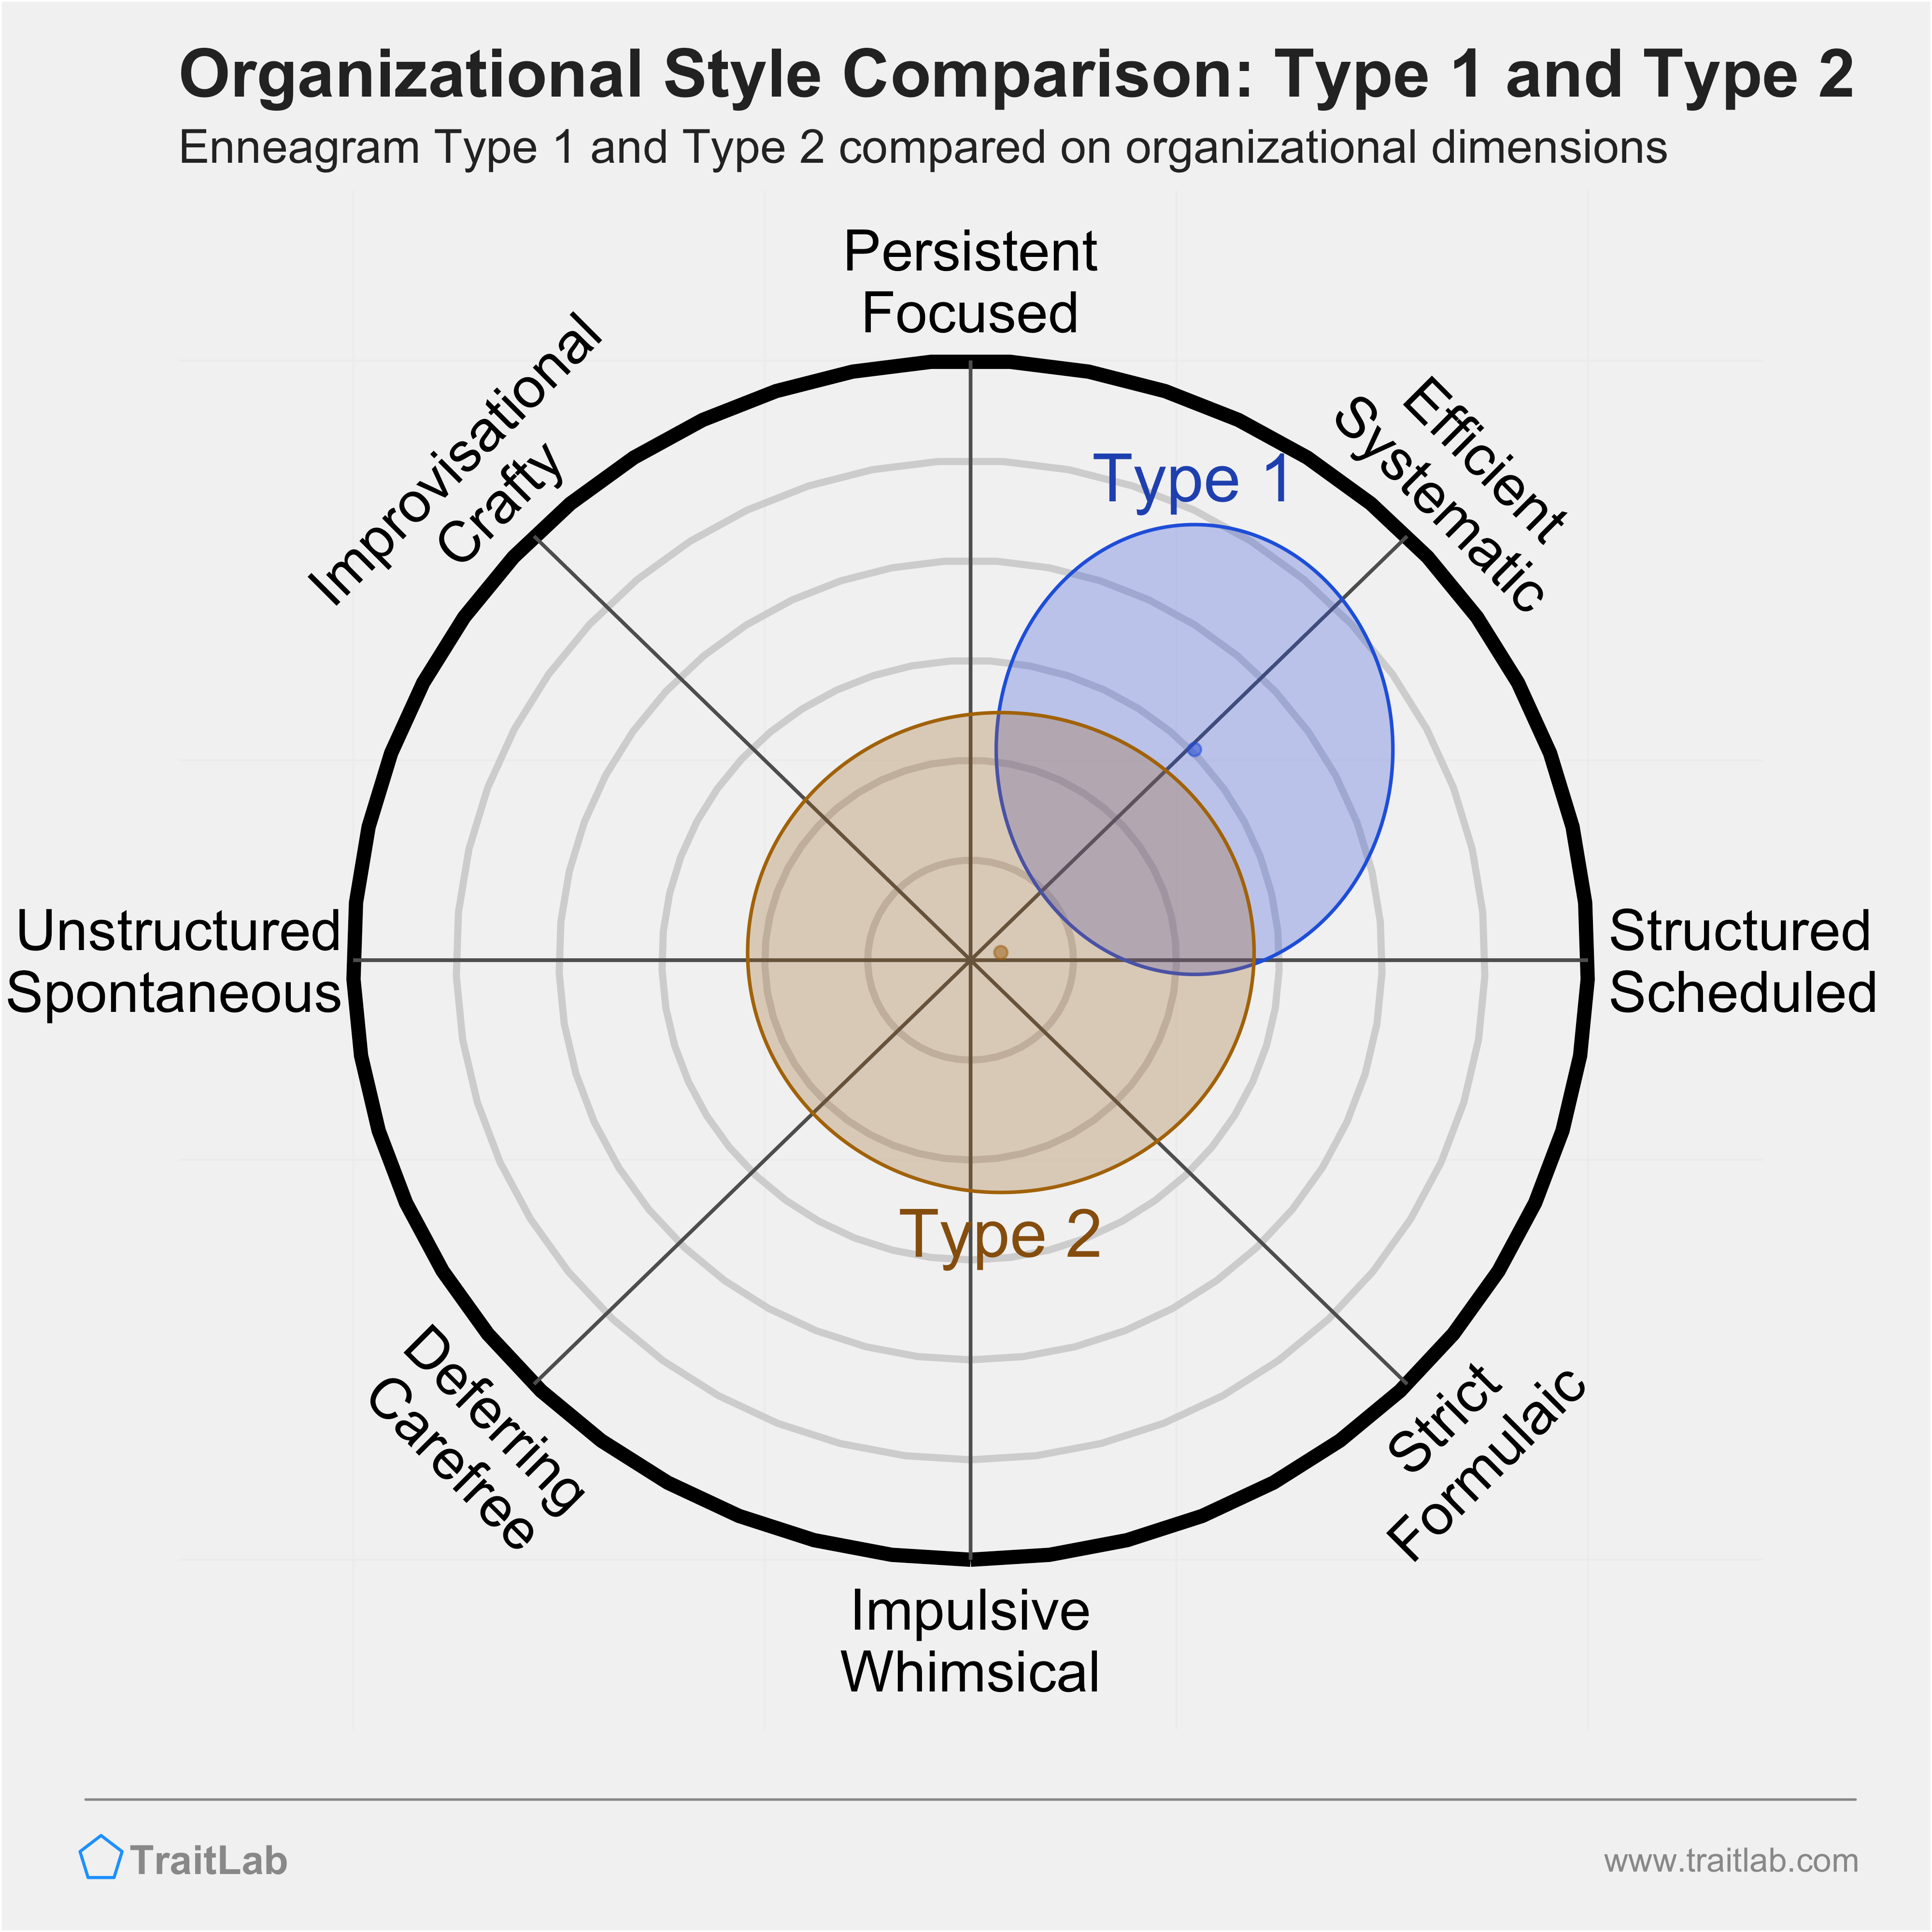 Type 1 and Type 2 comparison across organizational dimensions